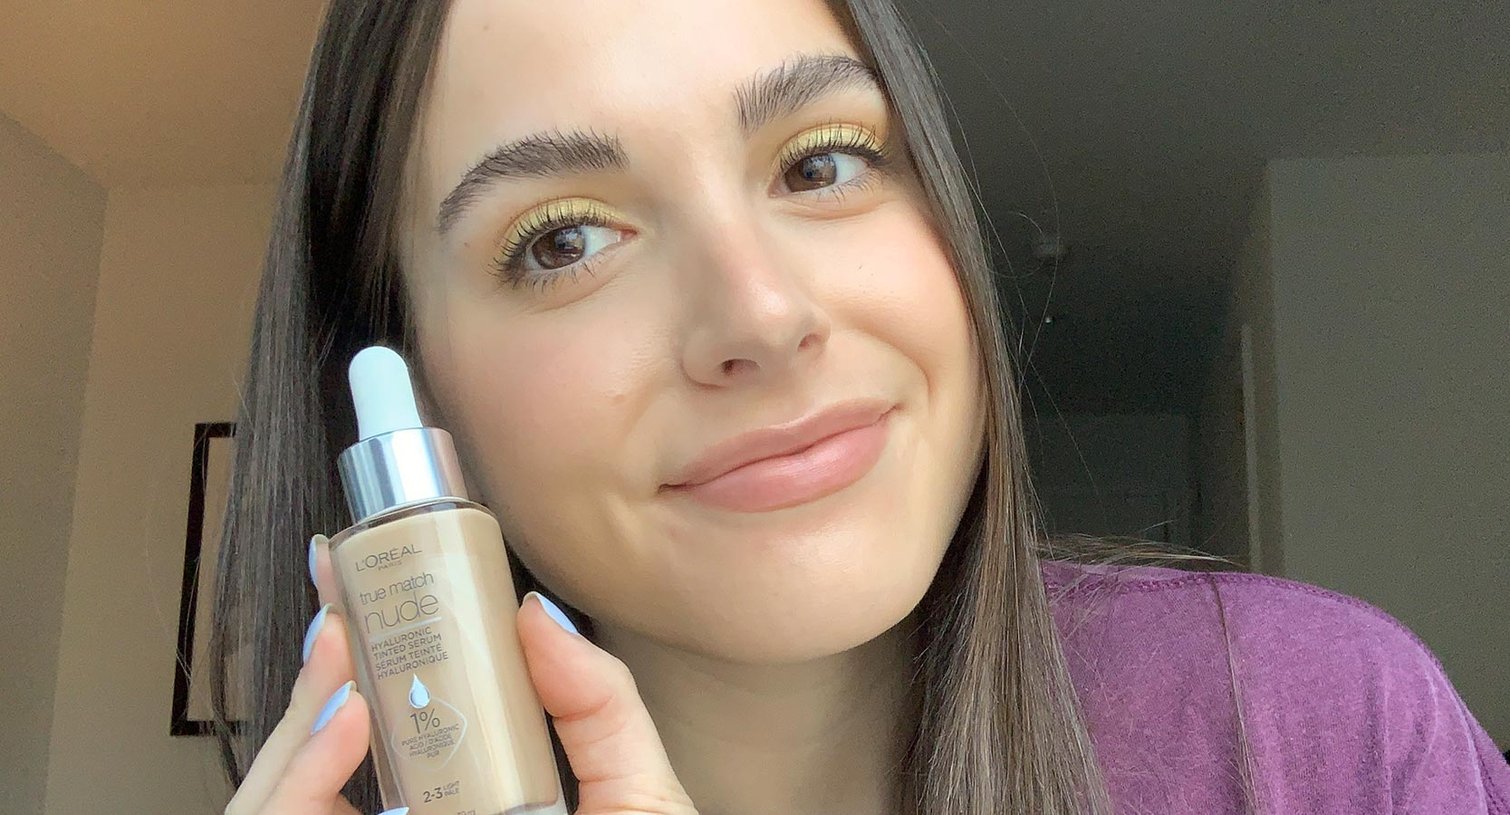 Thoughts on the Loreal True Match Tinted Serum for oily